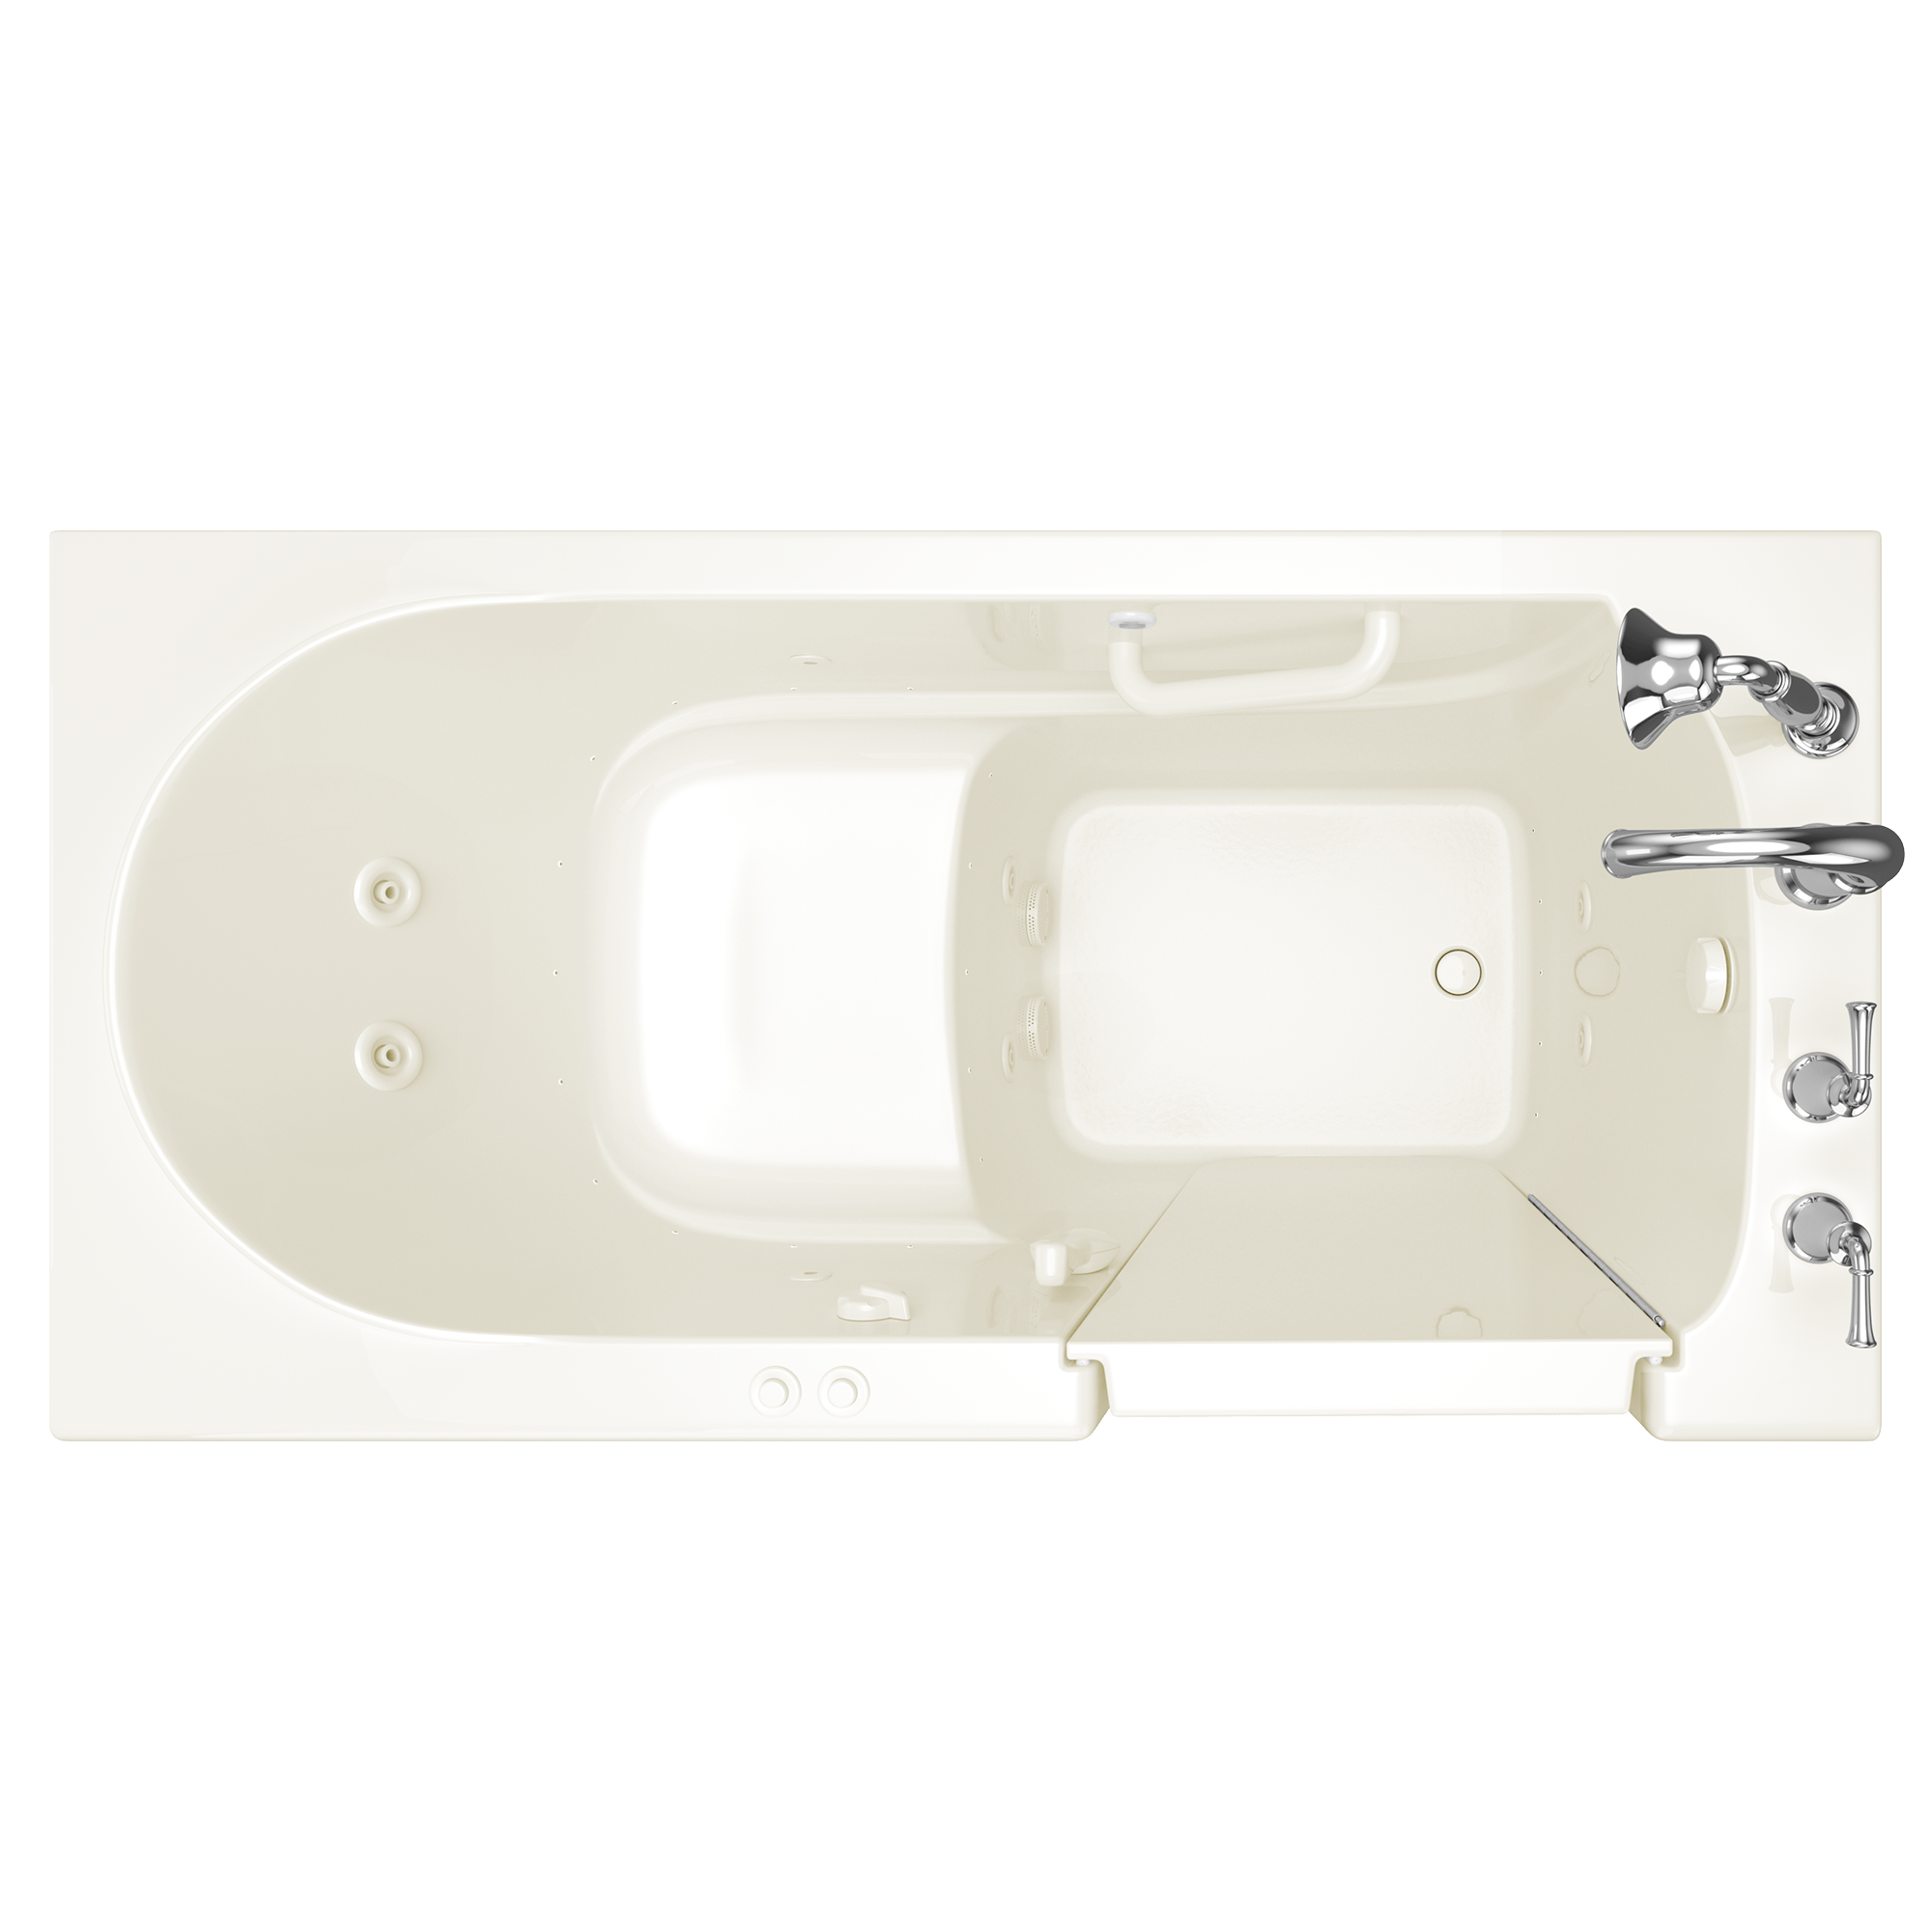 Gelcoat Value Series 30x60 Inch Walk-In Bathtub with Combination Air Spa and Whirlpool Massage System - Right Hand Door and Drain